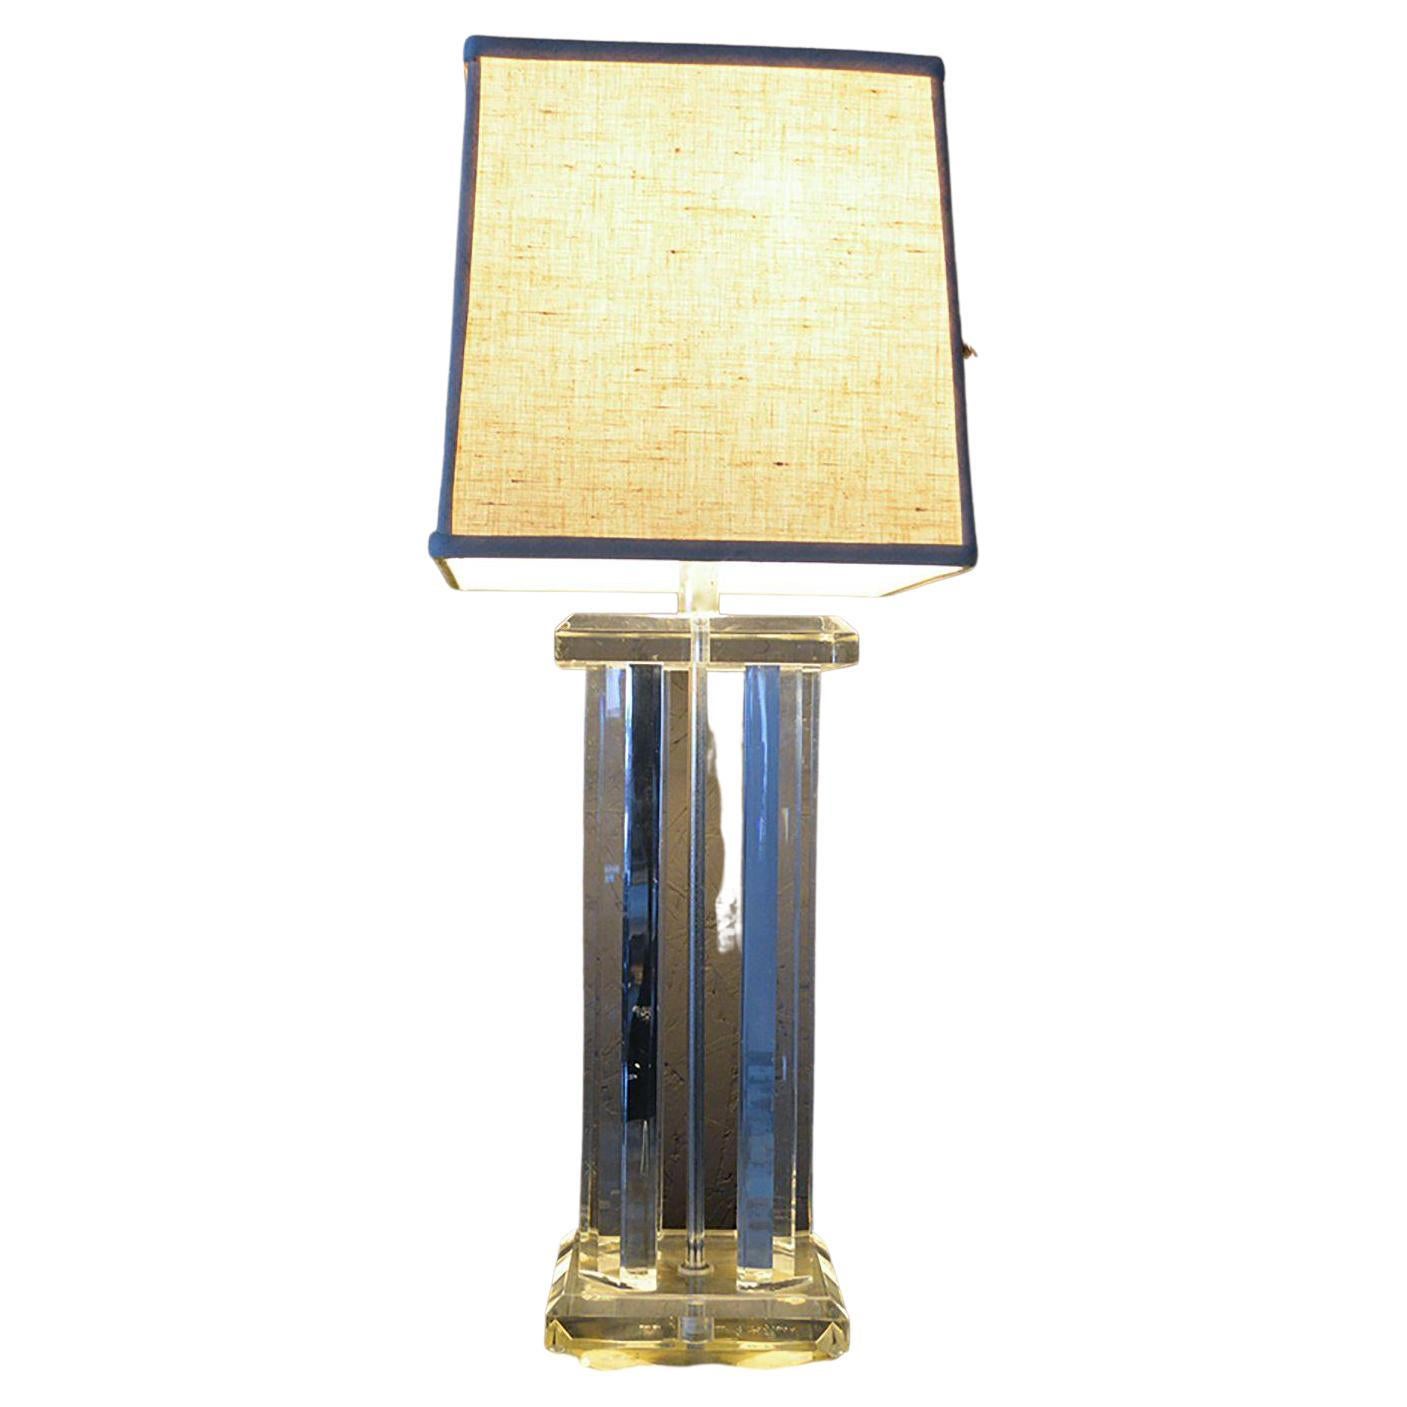 Table Lamp
Sculptural Lucite Table Lamp USA, 1960s. Similar to Charles Hollis Jones.
Unmarked.
Lamp shade pictured is not included.
Style Hollywood Regency.
Original preowned unrestored vintage condition. Some vintage wear present on lucite, marks